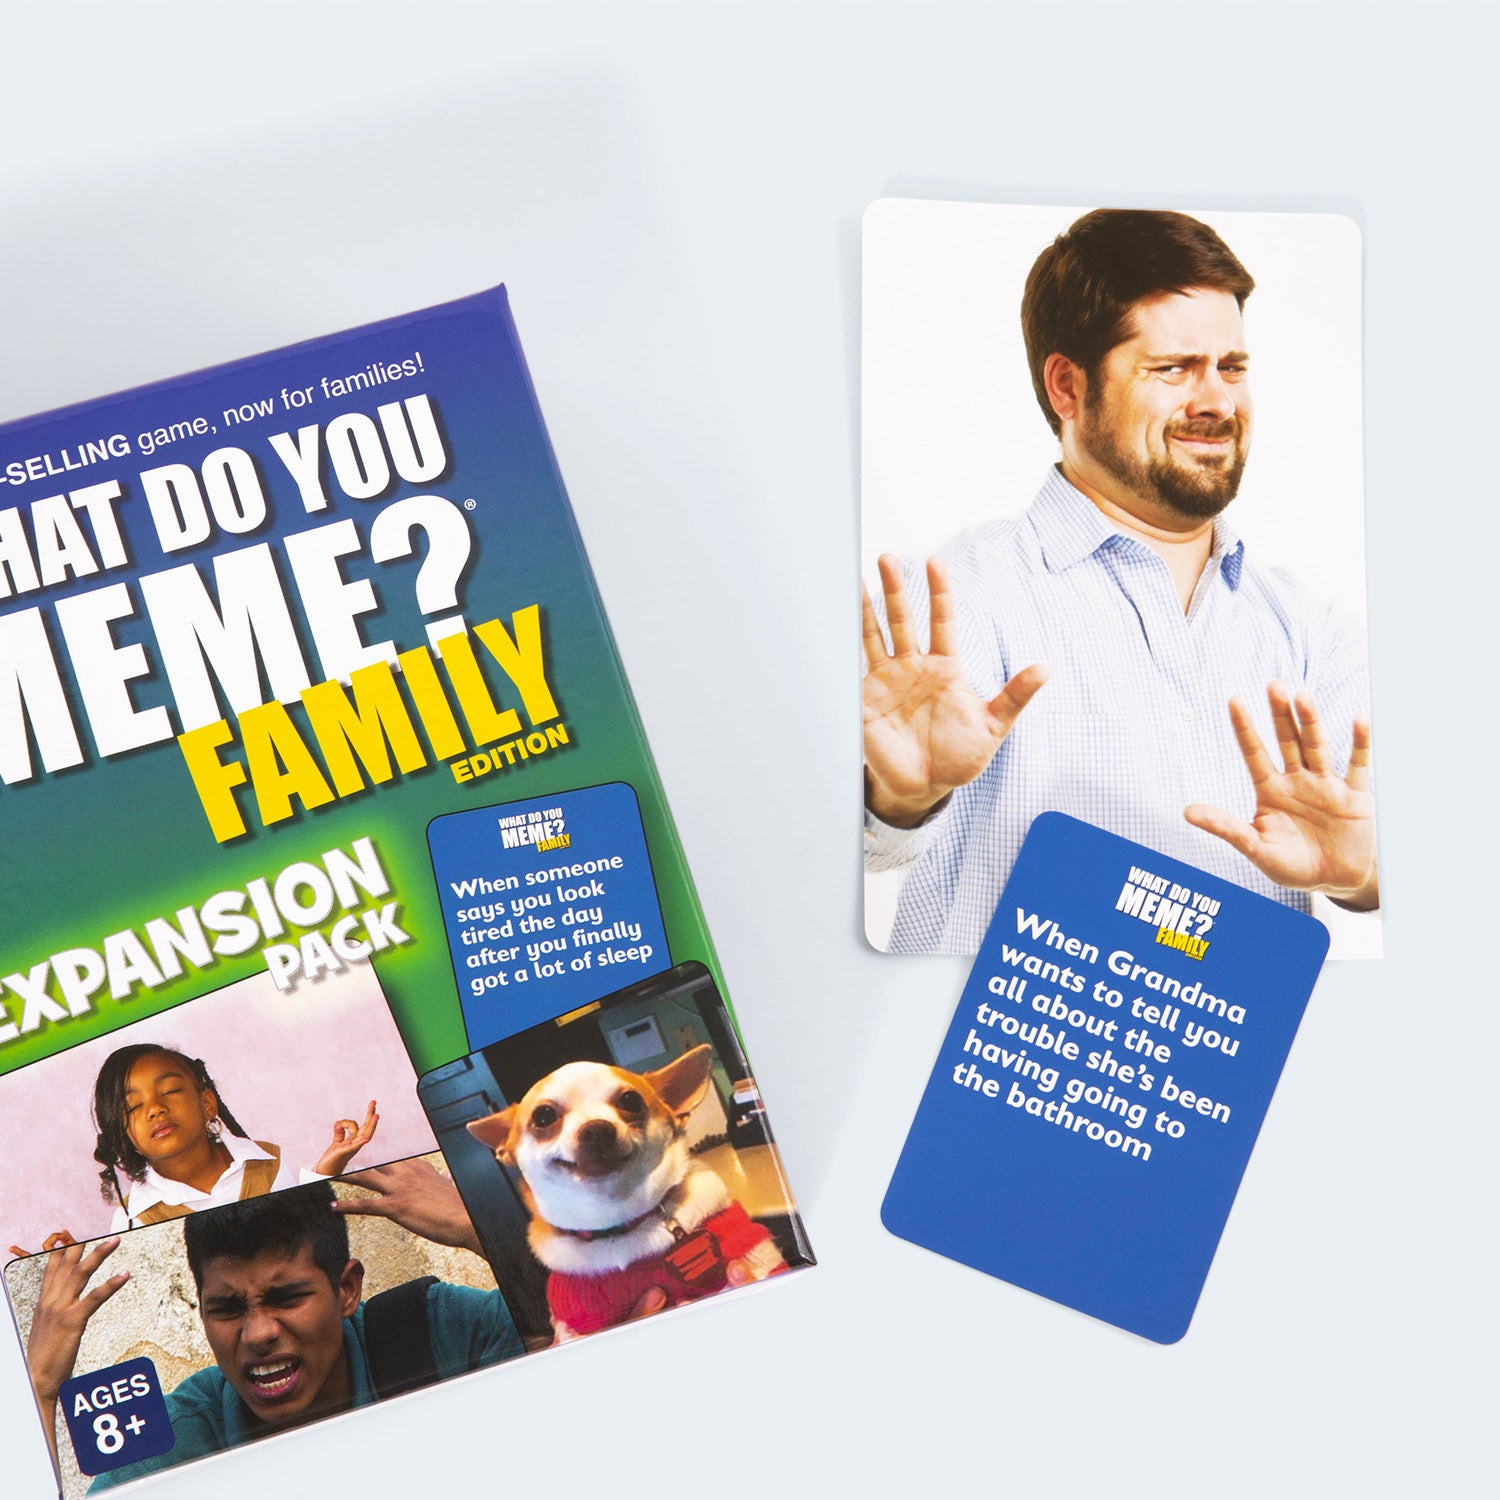 what-do-you-meme-family-edition-expansion-pack-game-box-and-game-play-06-what-do-you-meme-by-relatable